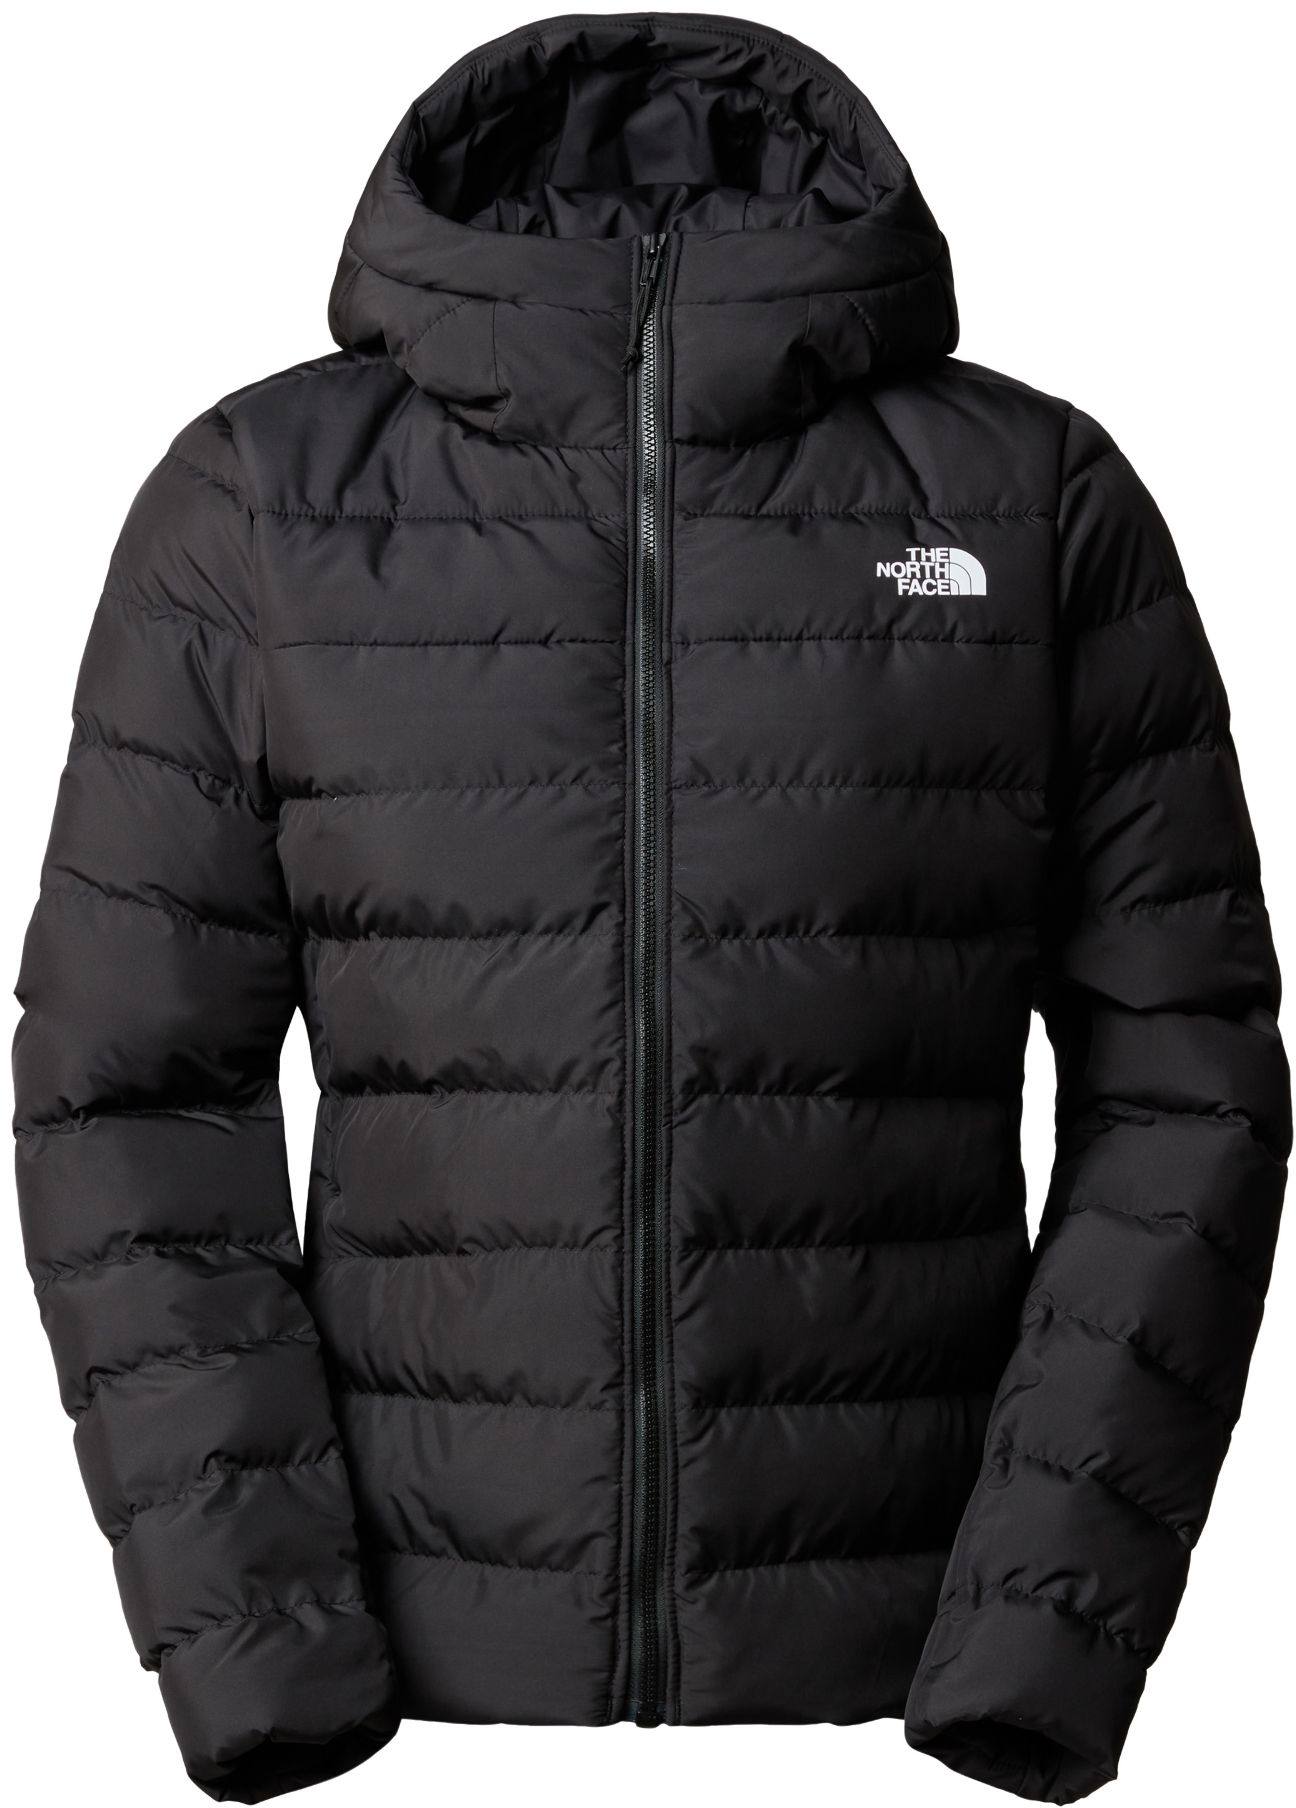 The North Face Women’s Aconcagua 3 Hoodie